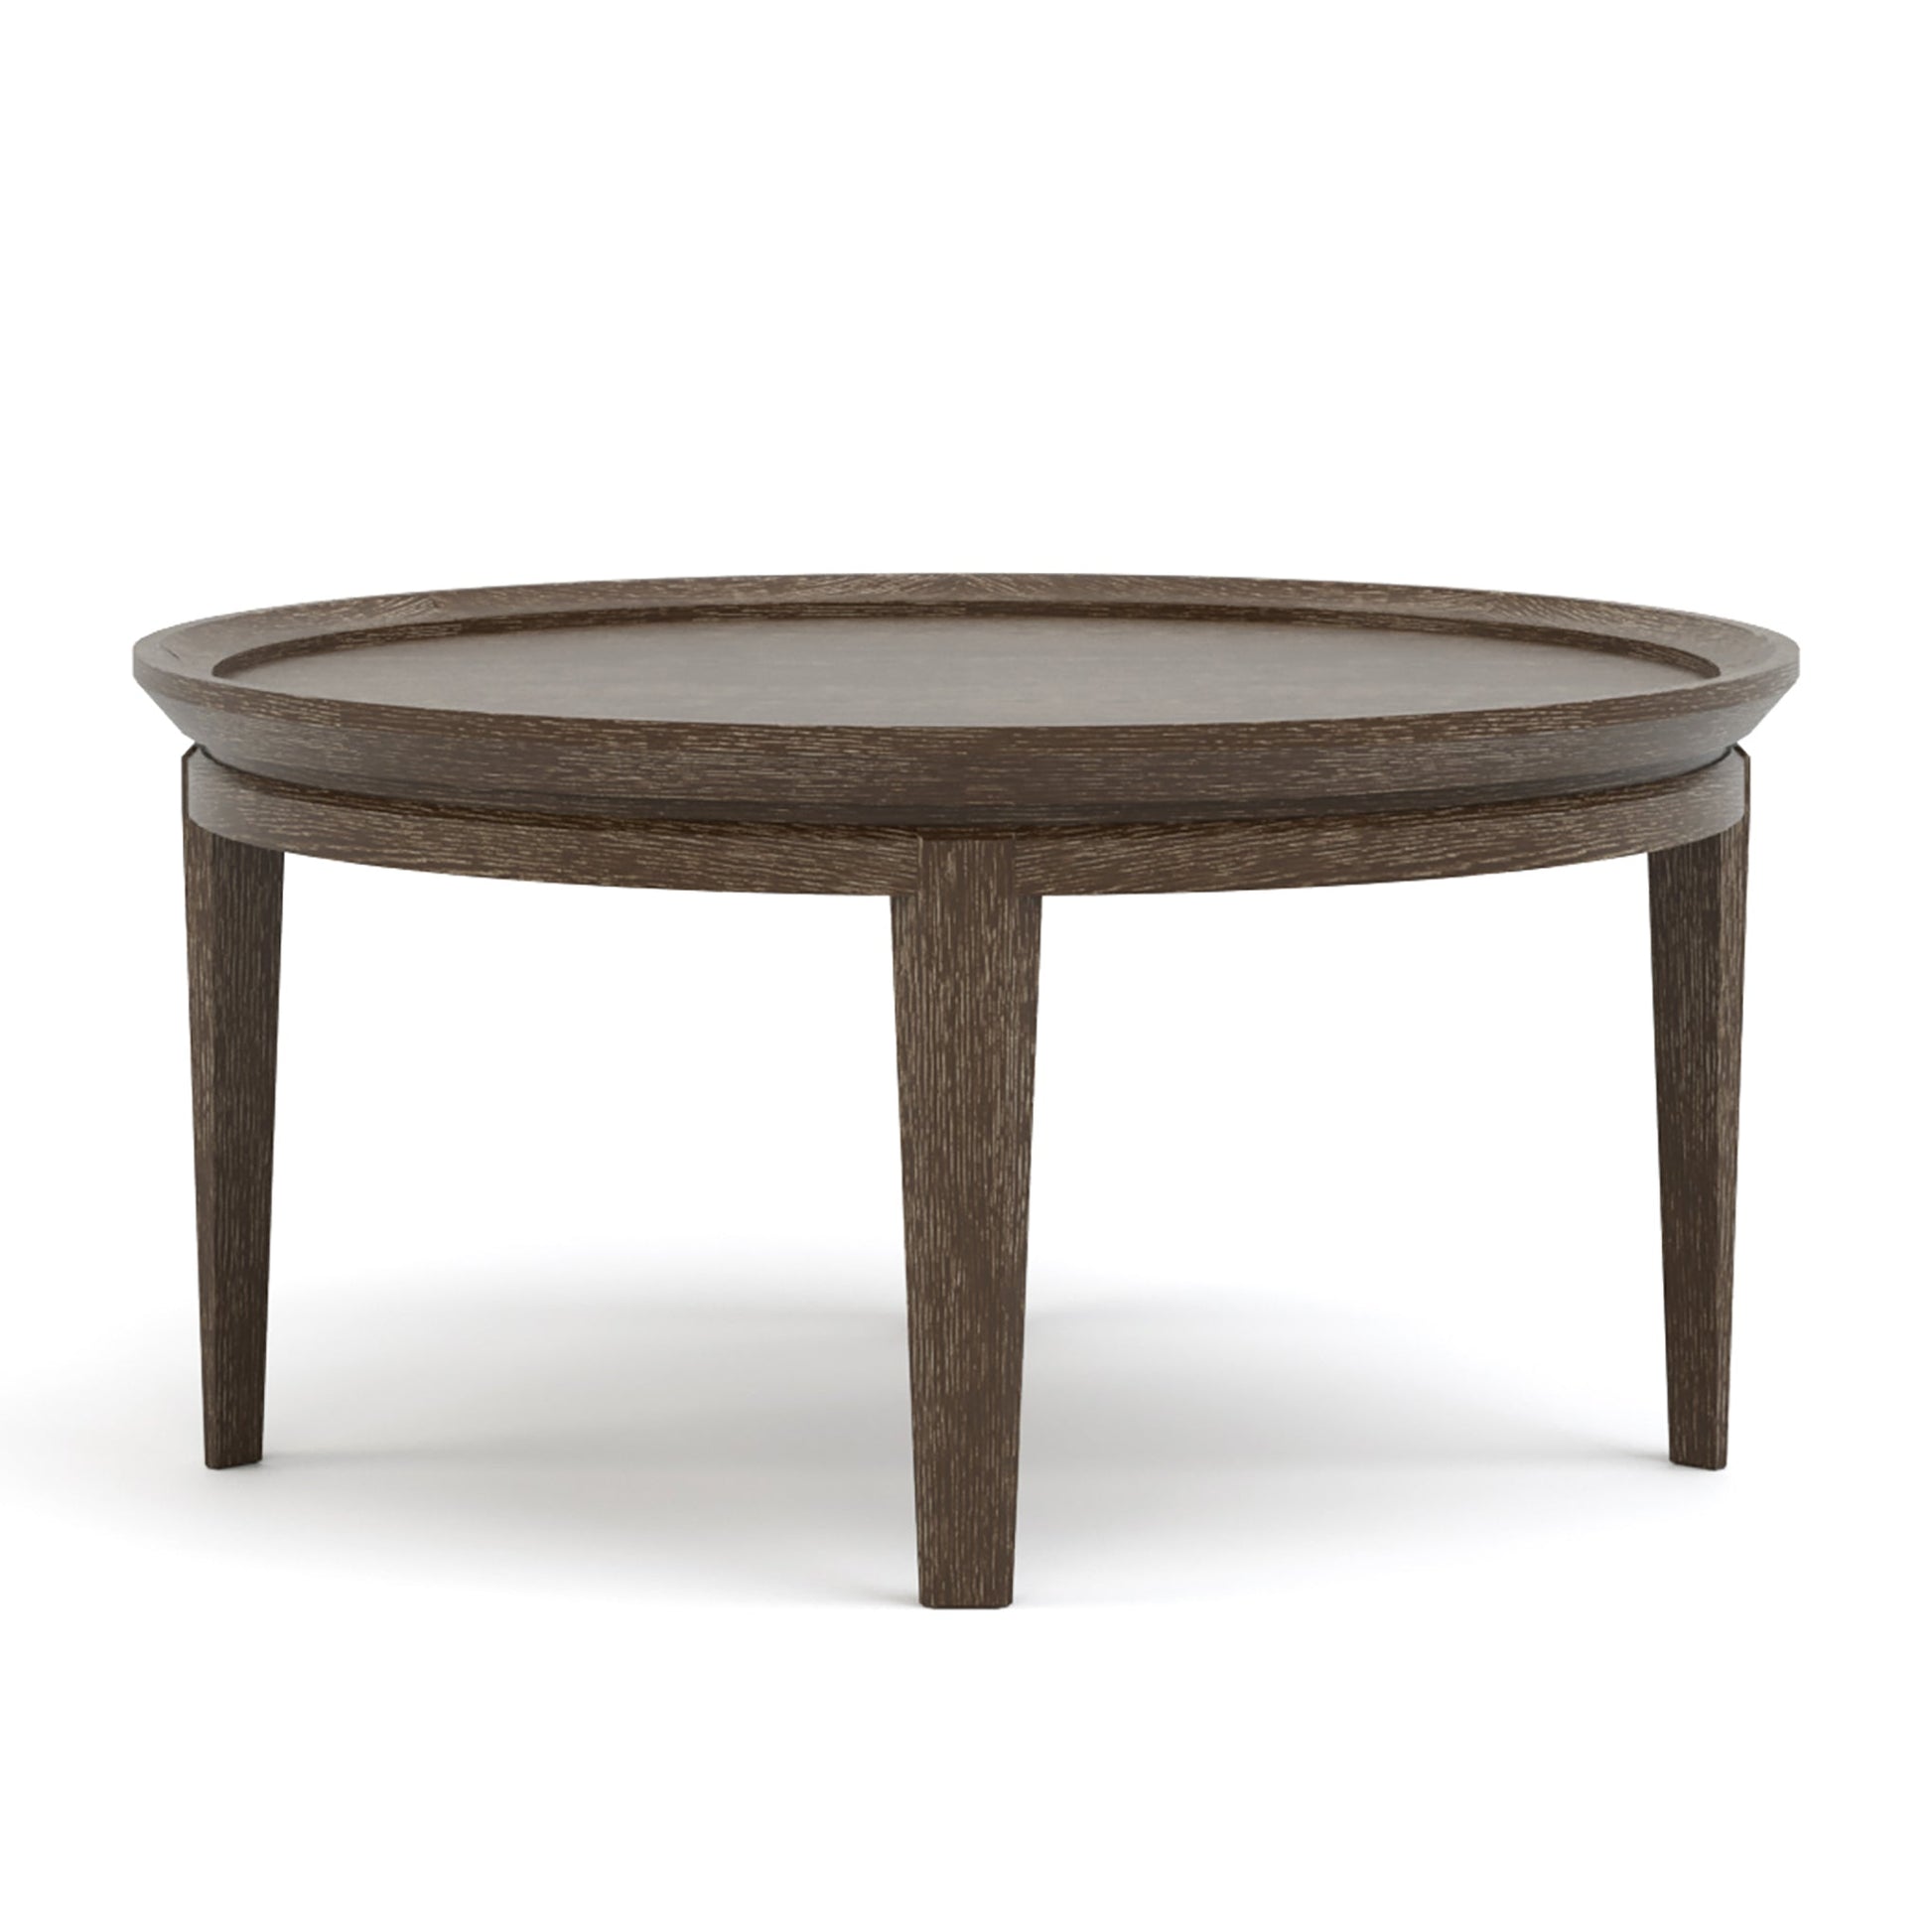 Maidstone 36-inch Round Cocktail Table in 202 Pier finish